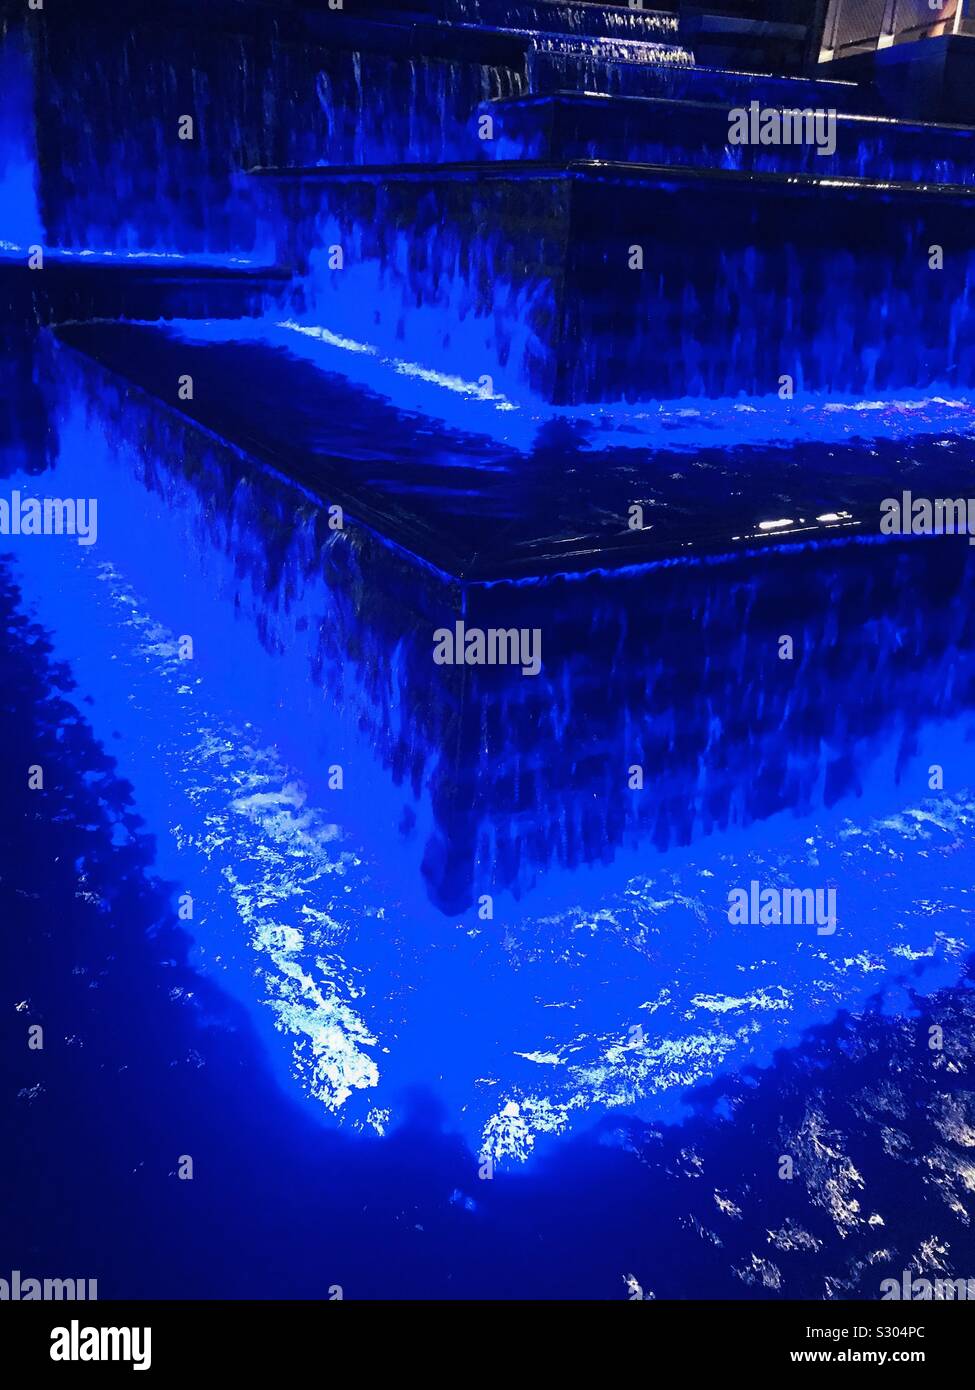 Blue LED water fountain in Jewel Changi Airport, Decorative light shining through water ripples Stock Photo